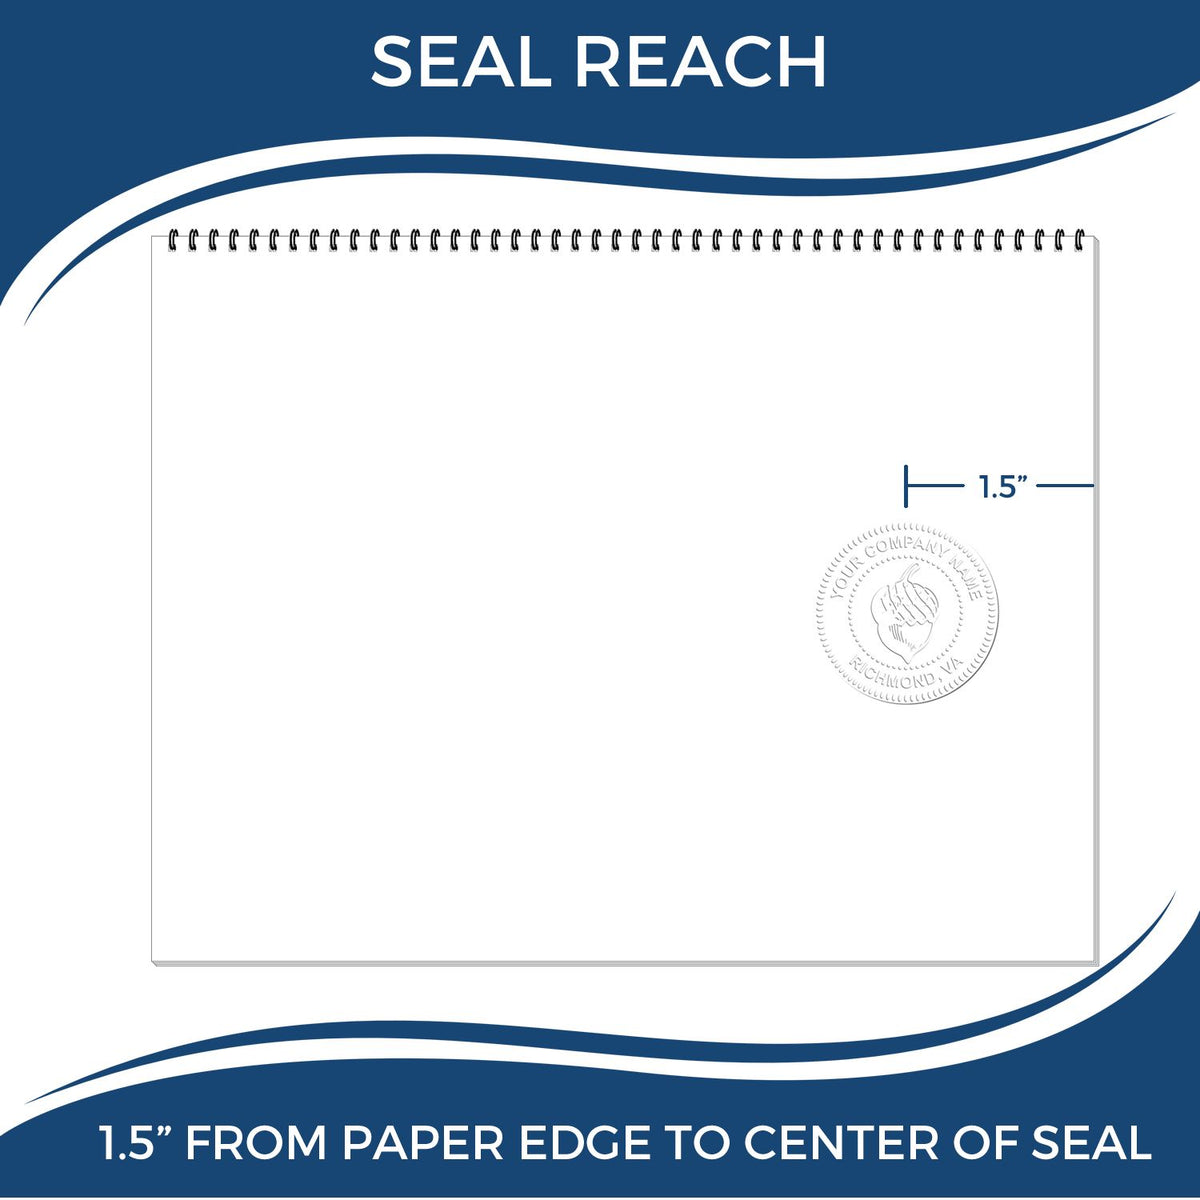 An infographic showing the seal reach which is represented by a ruler and a miniature seal image of the Gift Ohio Engineer Seal